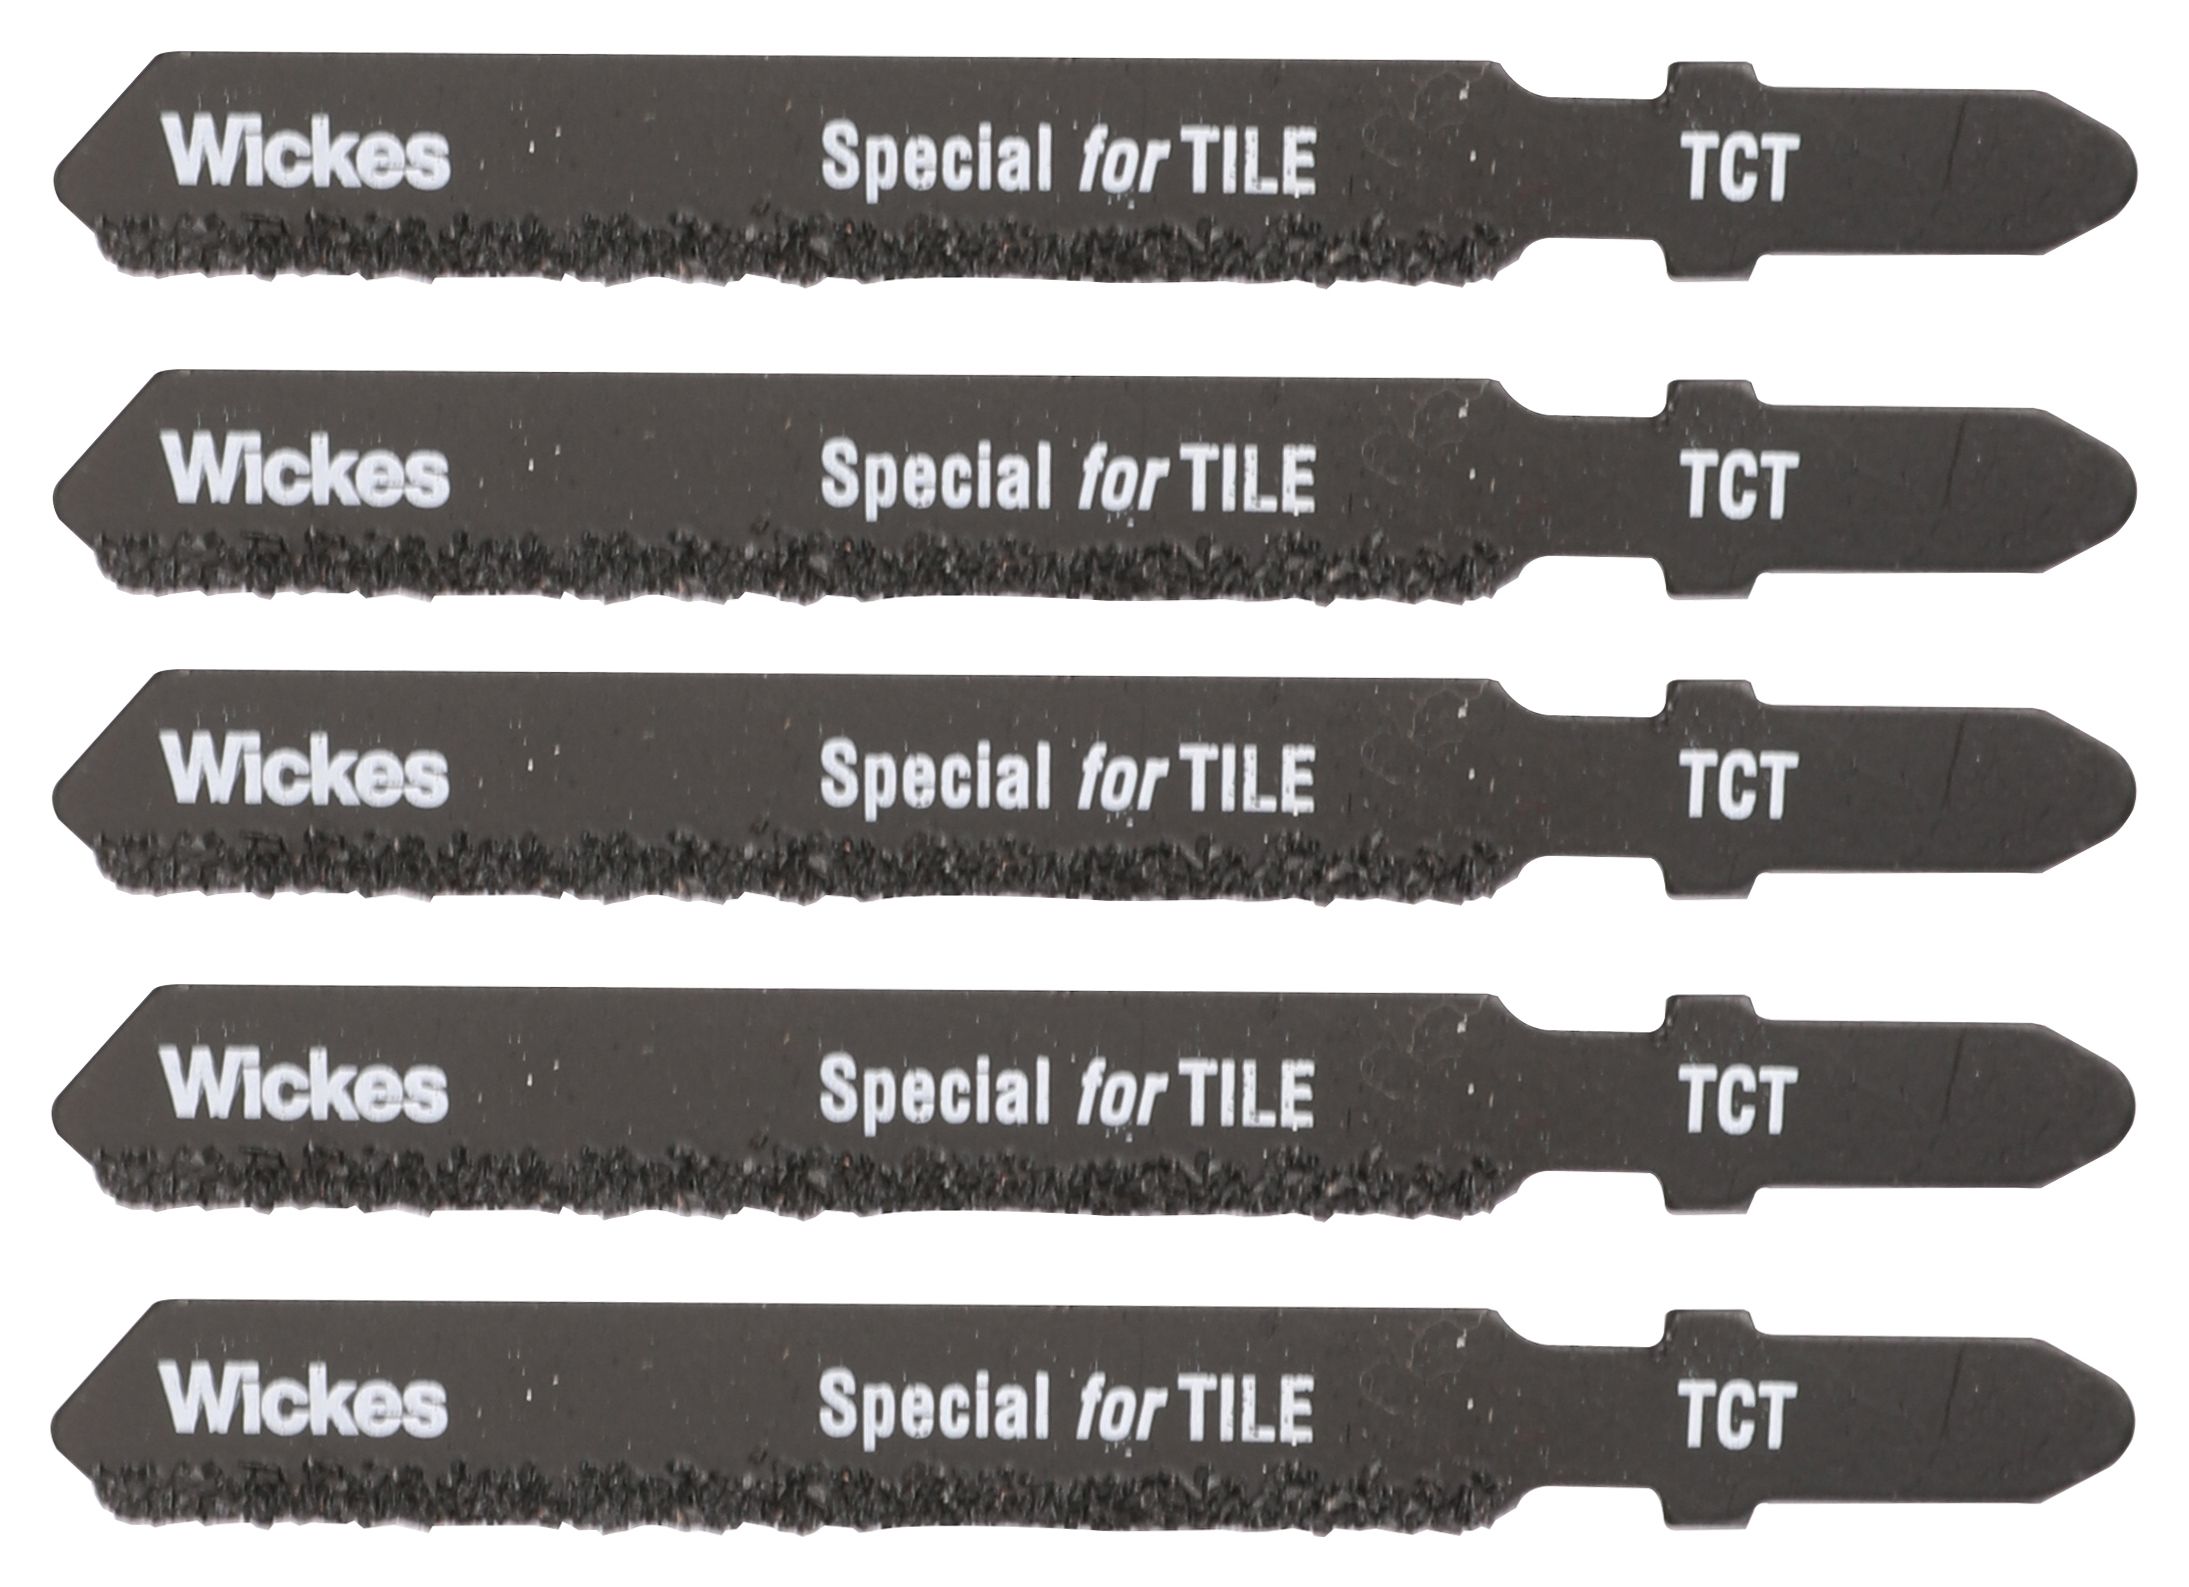 Wickes T Shank Tungsten Carbide Jigsaw Blade for Tile - Pack of 5